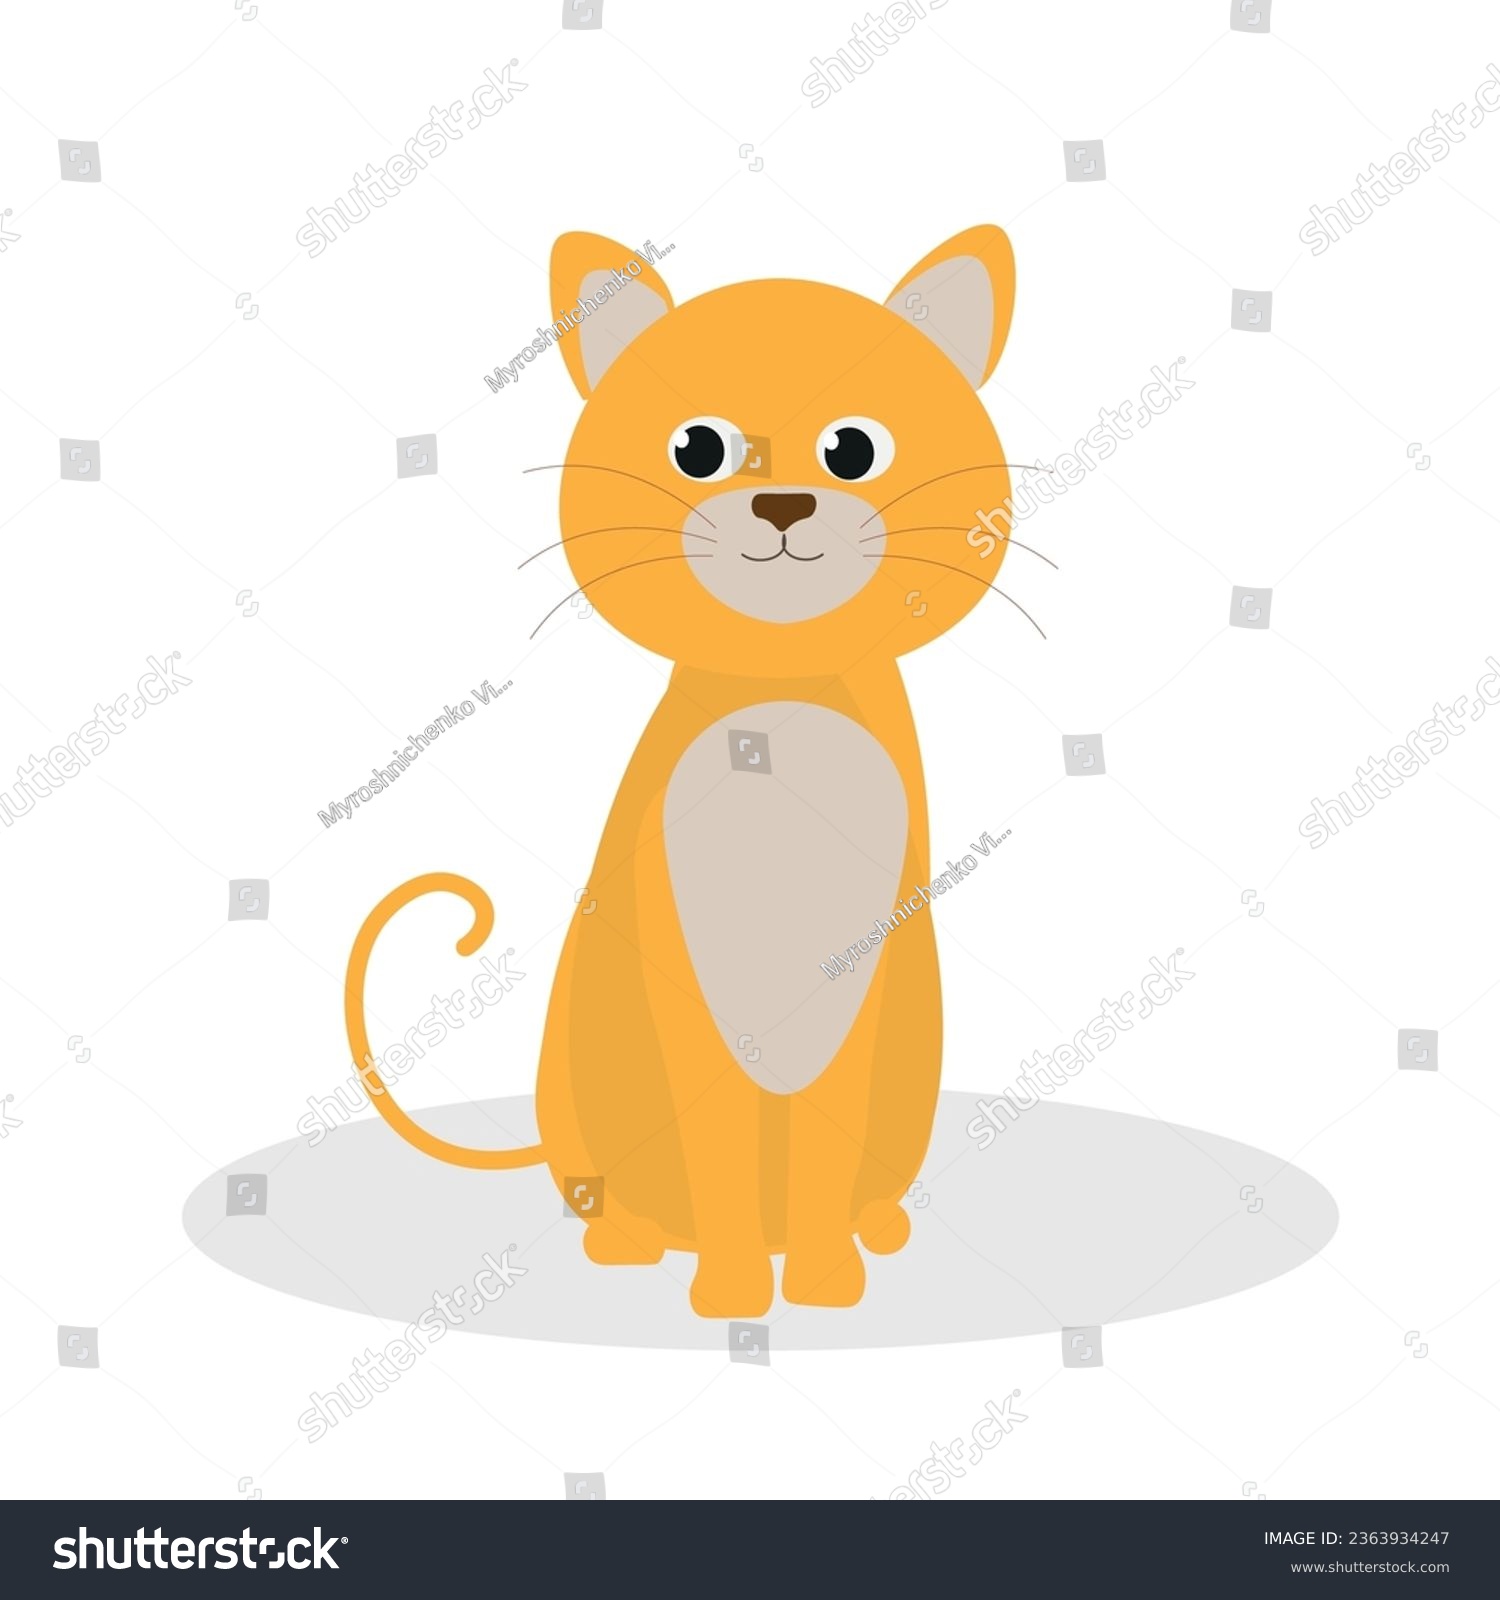 SVG of Vector cat icon. Cute cat is sitting. Vector flat illustration. Suitable for animation, using in web, apps, books, education projects. No transparency, solid colors only. Svg, lottie without bags. svg